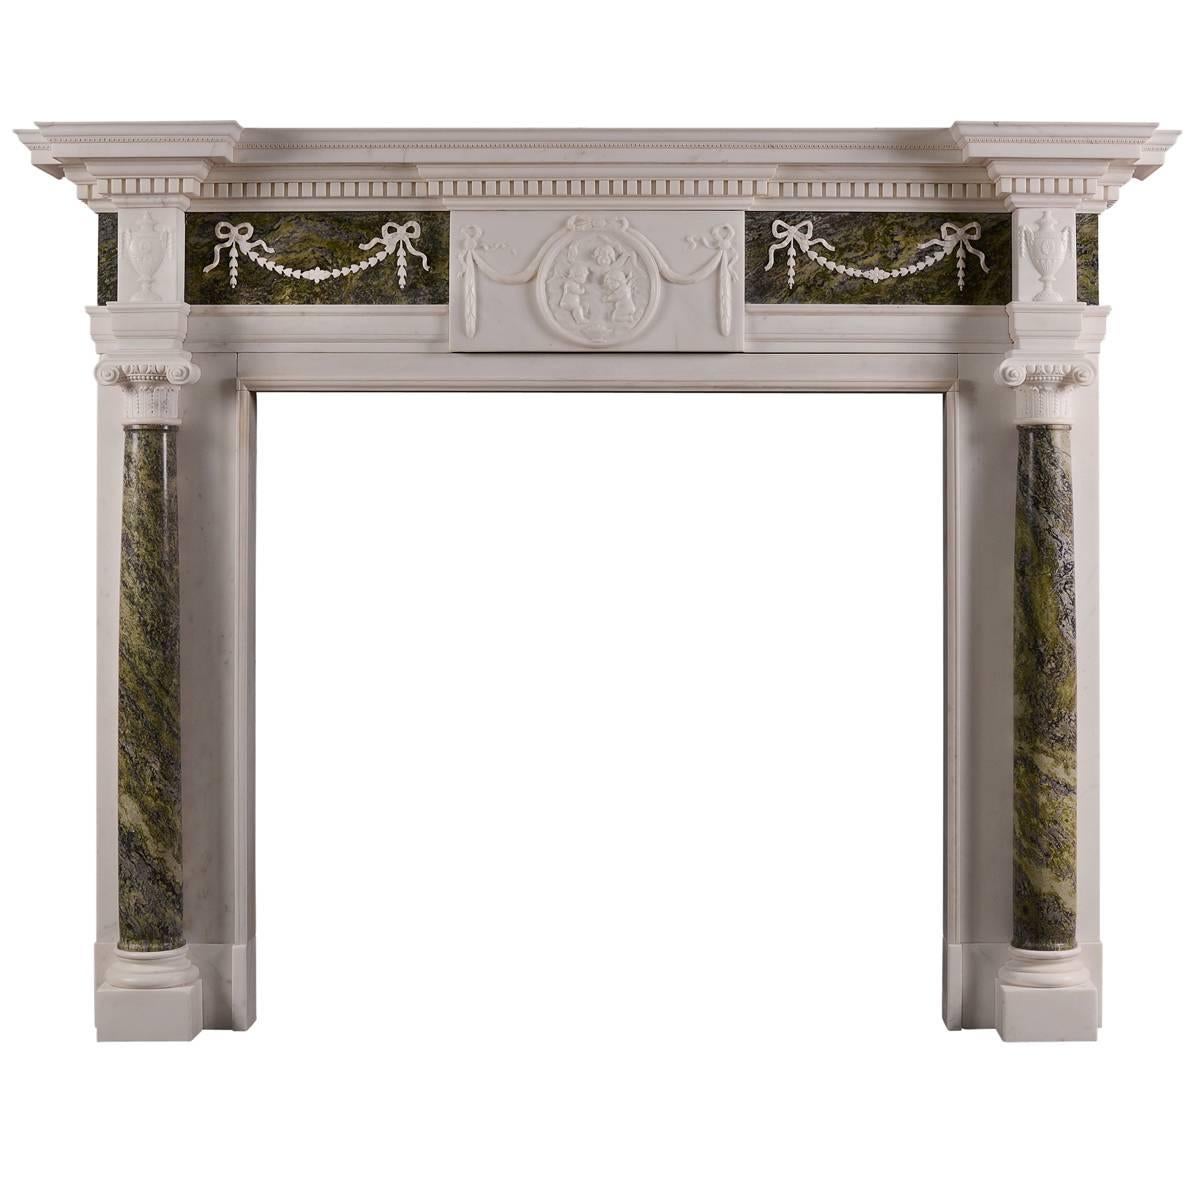 Statuary Marble Fireplace with Connemara Columns